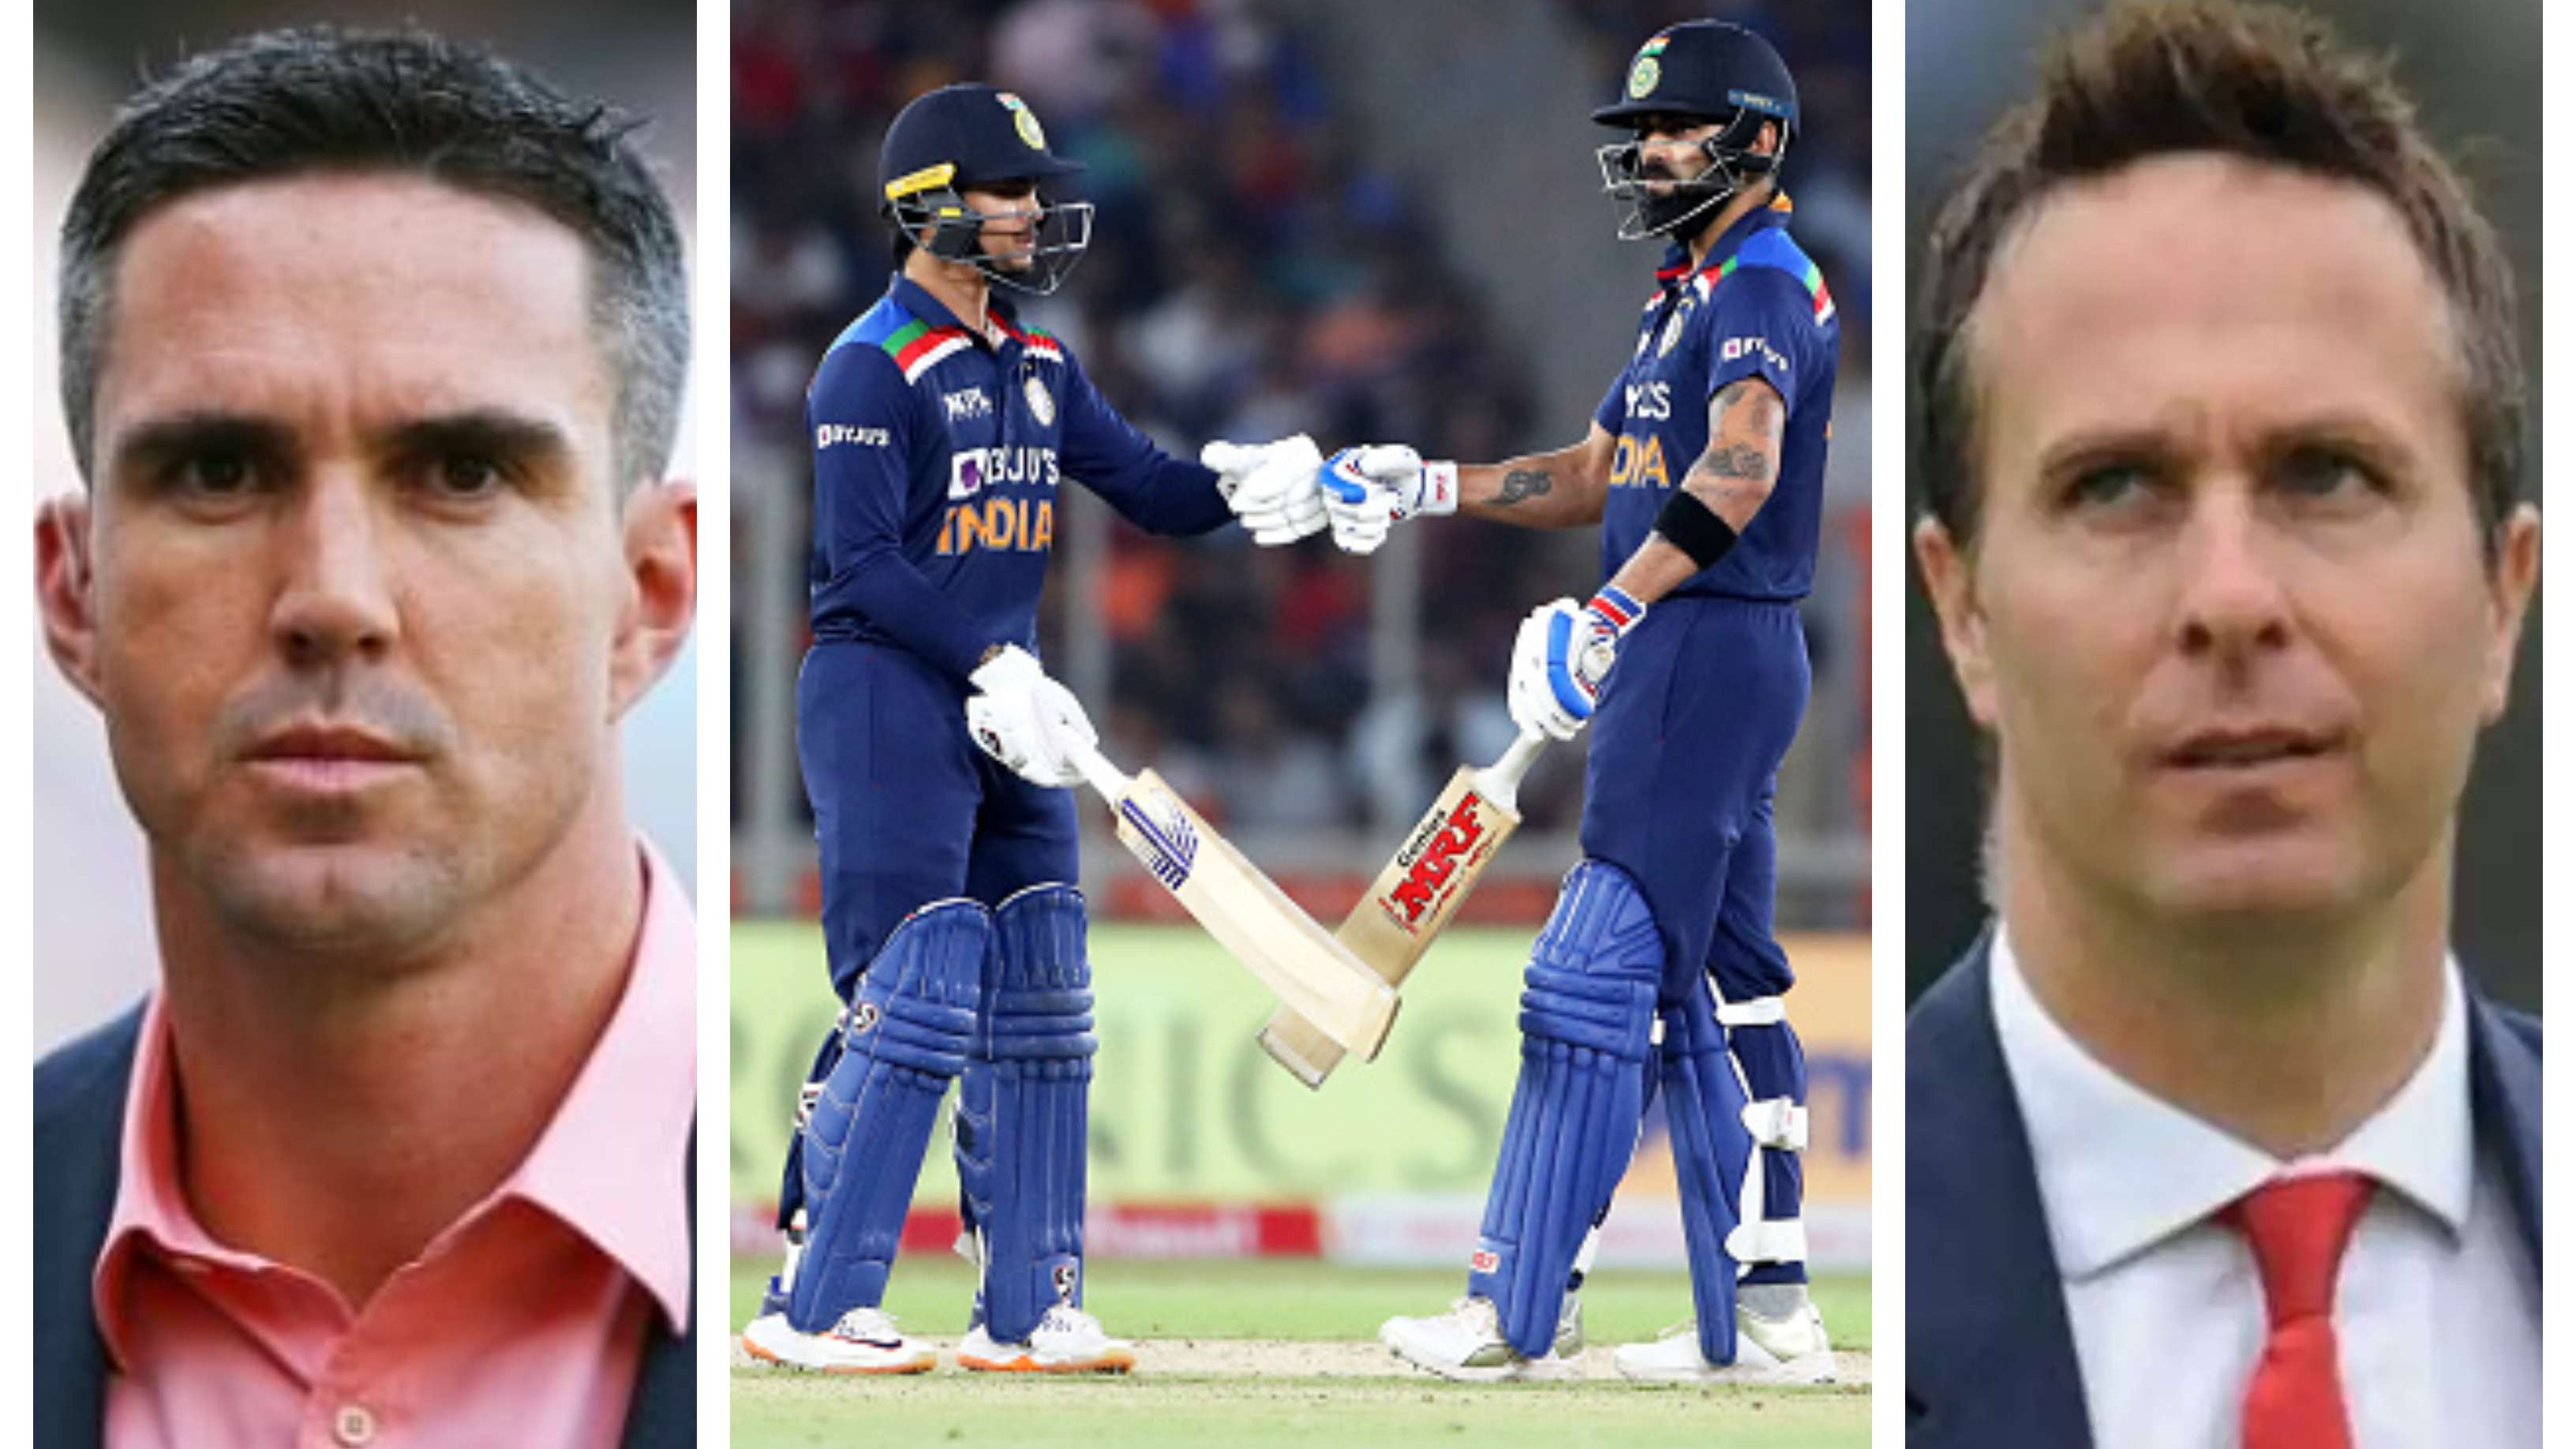 IND v ENG 2021: Cricket fraternity reacts as Kohli, Kishan’s fifties power India to 7-wicket win in 2nd T20I